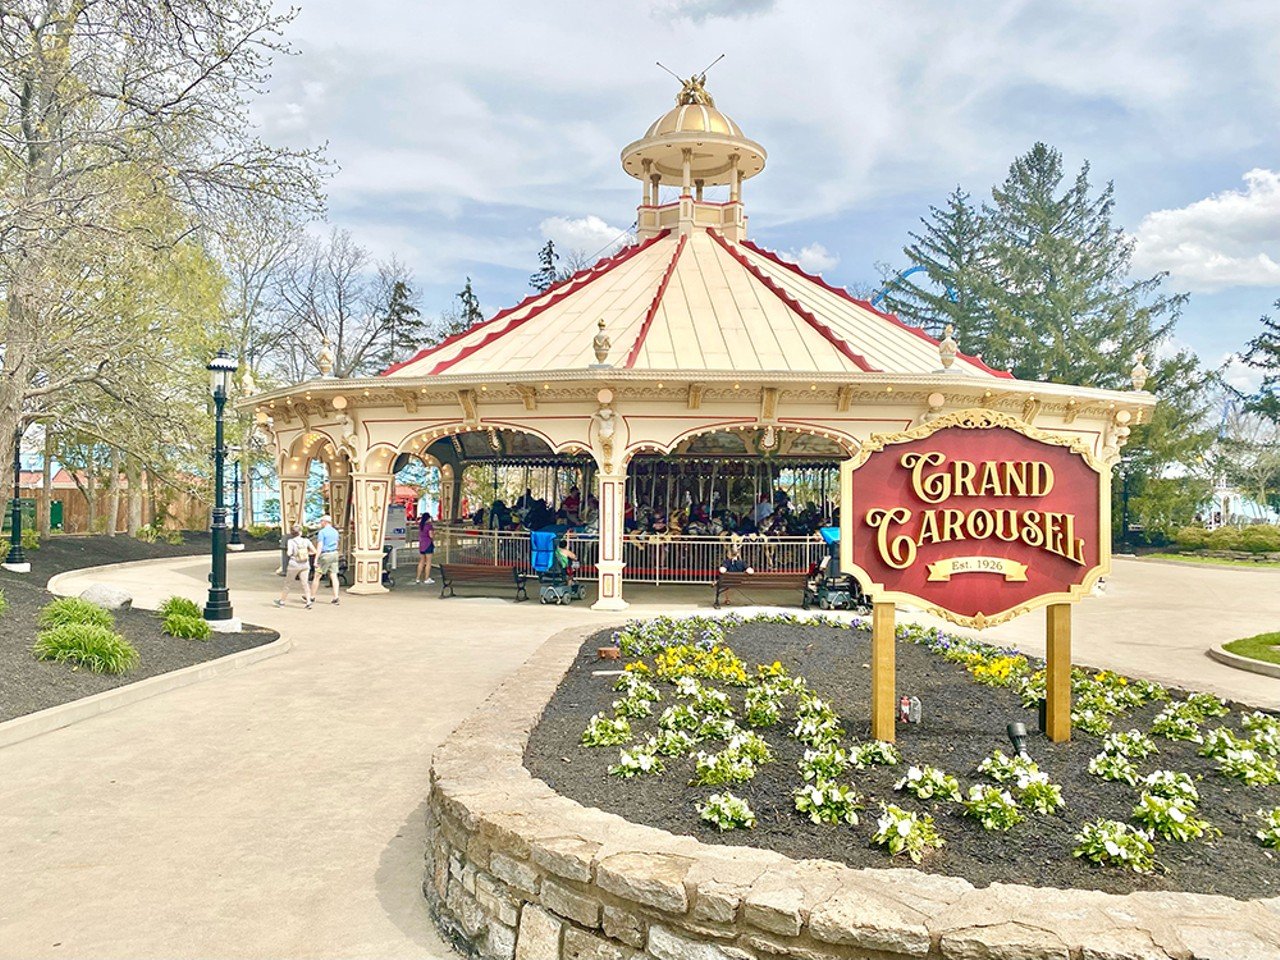 Grand Carousel 
Built in 1926 and originally housed at Coney Island, this whimsical ride comes complete with a Wurlitzer Band Organ, which was refurbished for the anniversary and is once again operational.